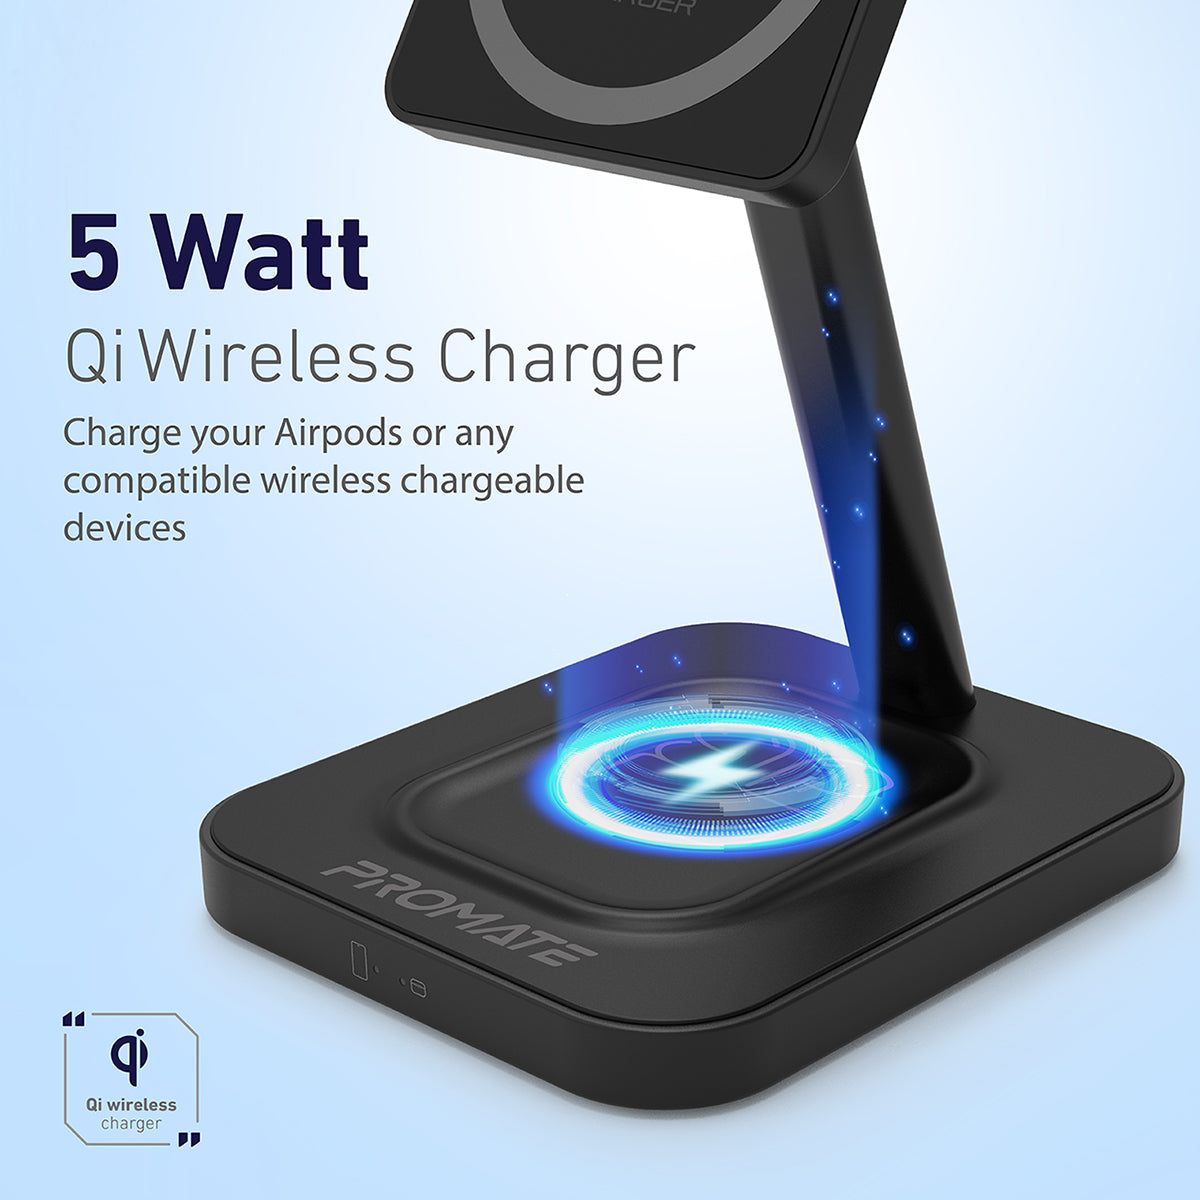 Promate Magnetic Wireless Charger for iPhone 12, 2-in-1 Mag-Safe 15W Fast Wireless Charger with Adjustable Neck and Anti-Slip 5W Charging Pad for iPhone 12/12 Mini/12 Pro/12 Pro Max/AirPods 2/AirPods Pro, AurBase-15W Black